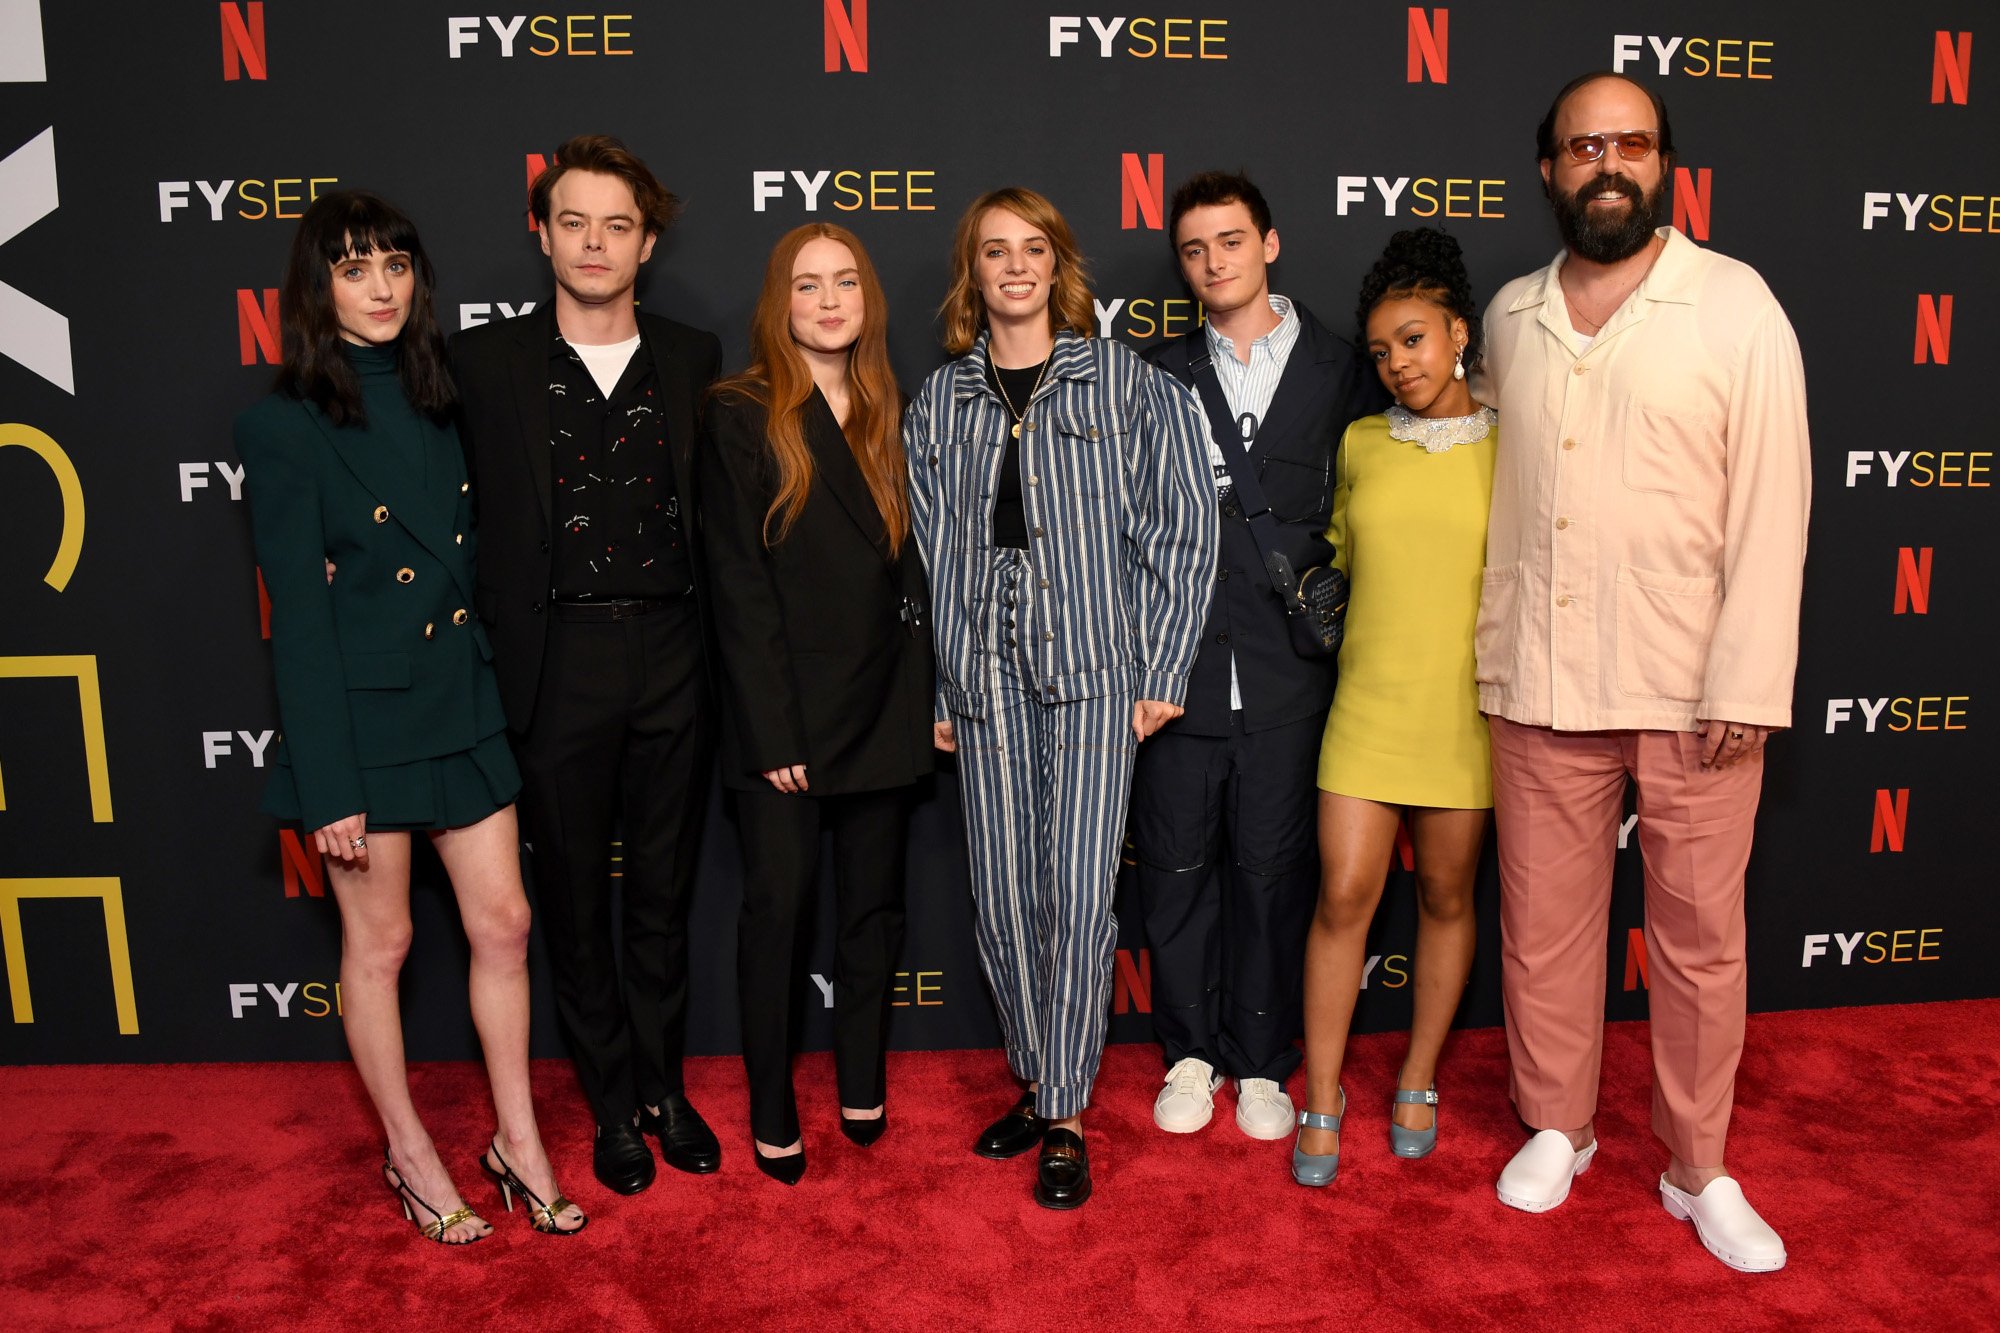 Stranger Things Season 4 Gets Netflix Premiere Dates, Show to End